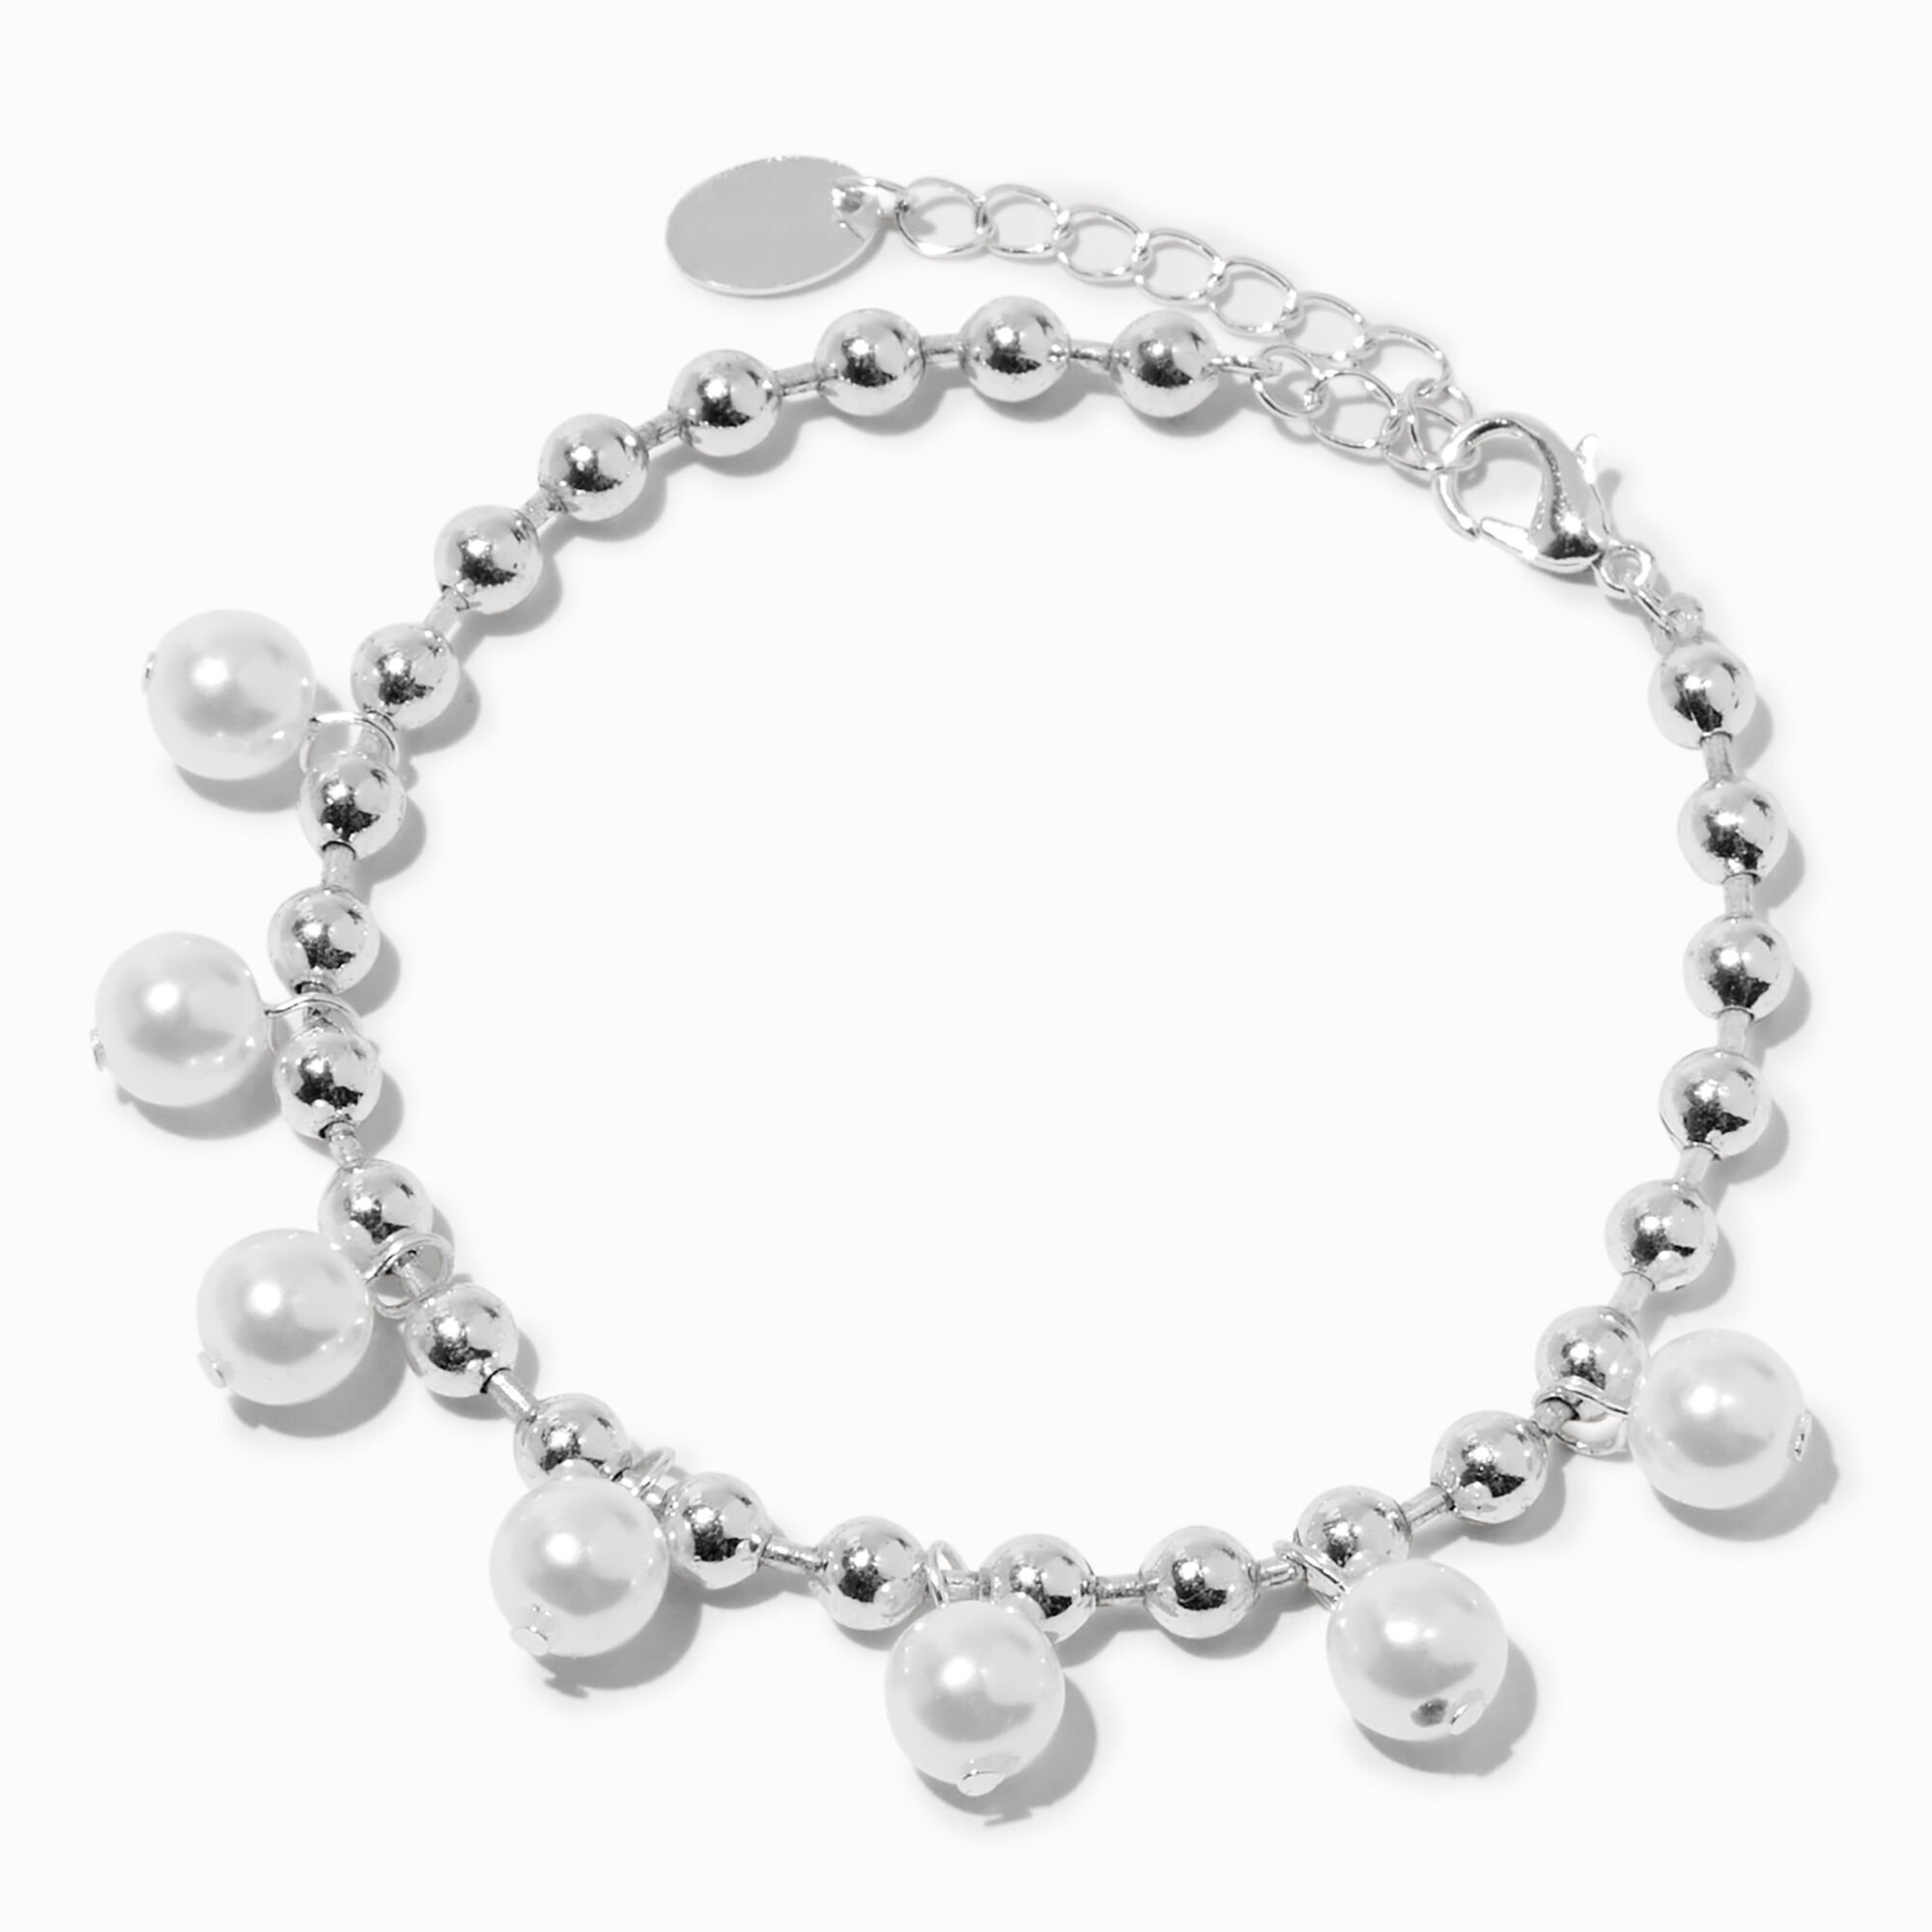 View Claires Tone Pearl Charm Chain Bracelet Silver information